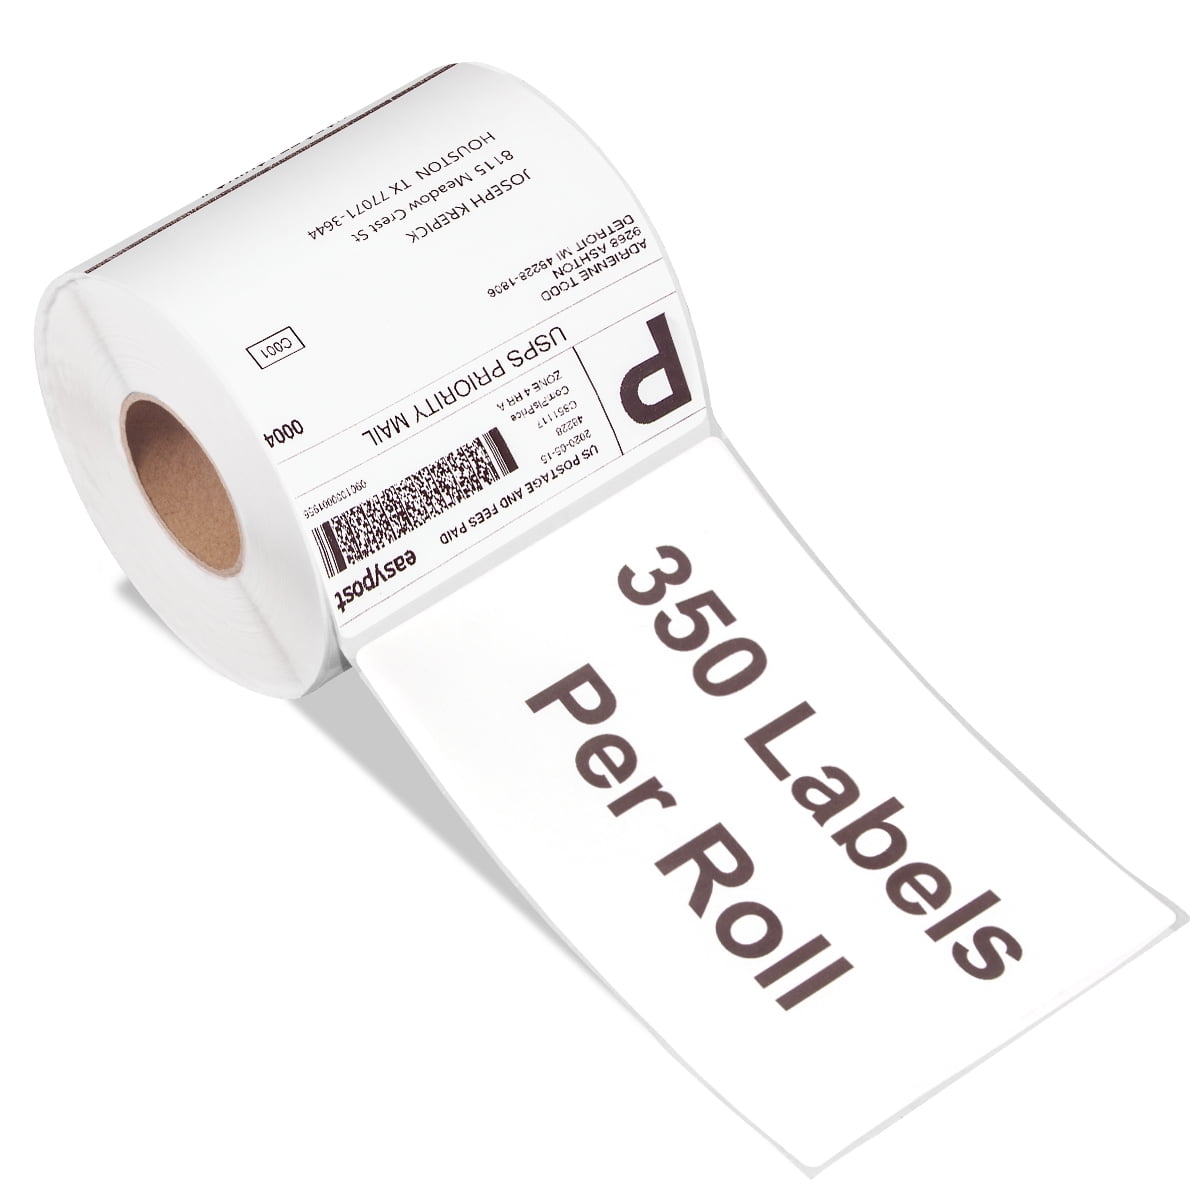 PACKING 4" X 6" THERMAL LABELS Rolls of 500 suitable for ZEBRA Printers 